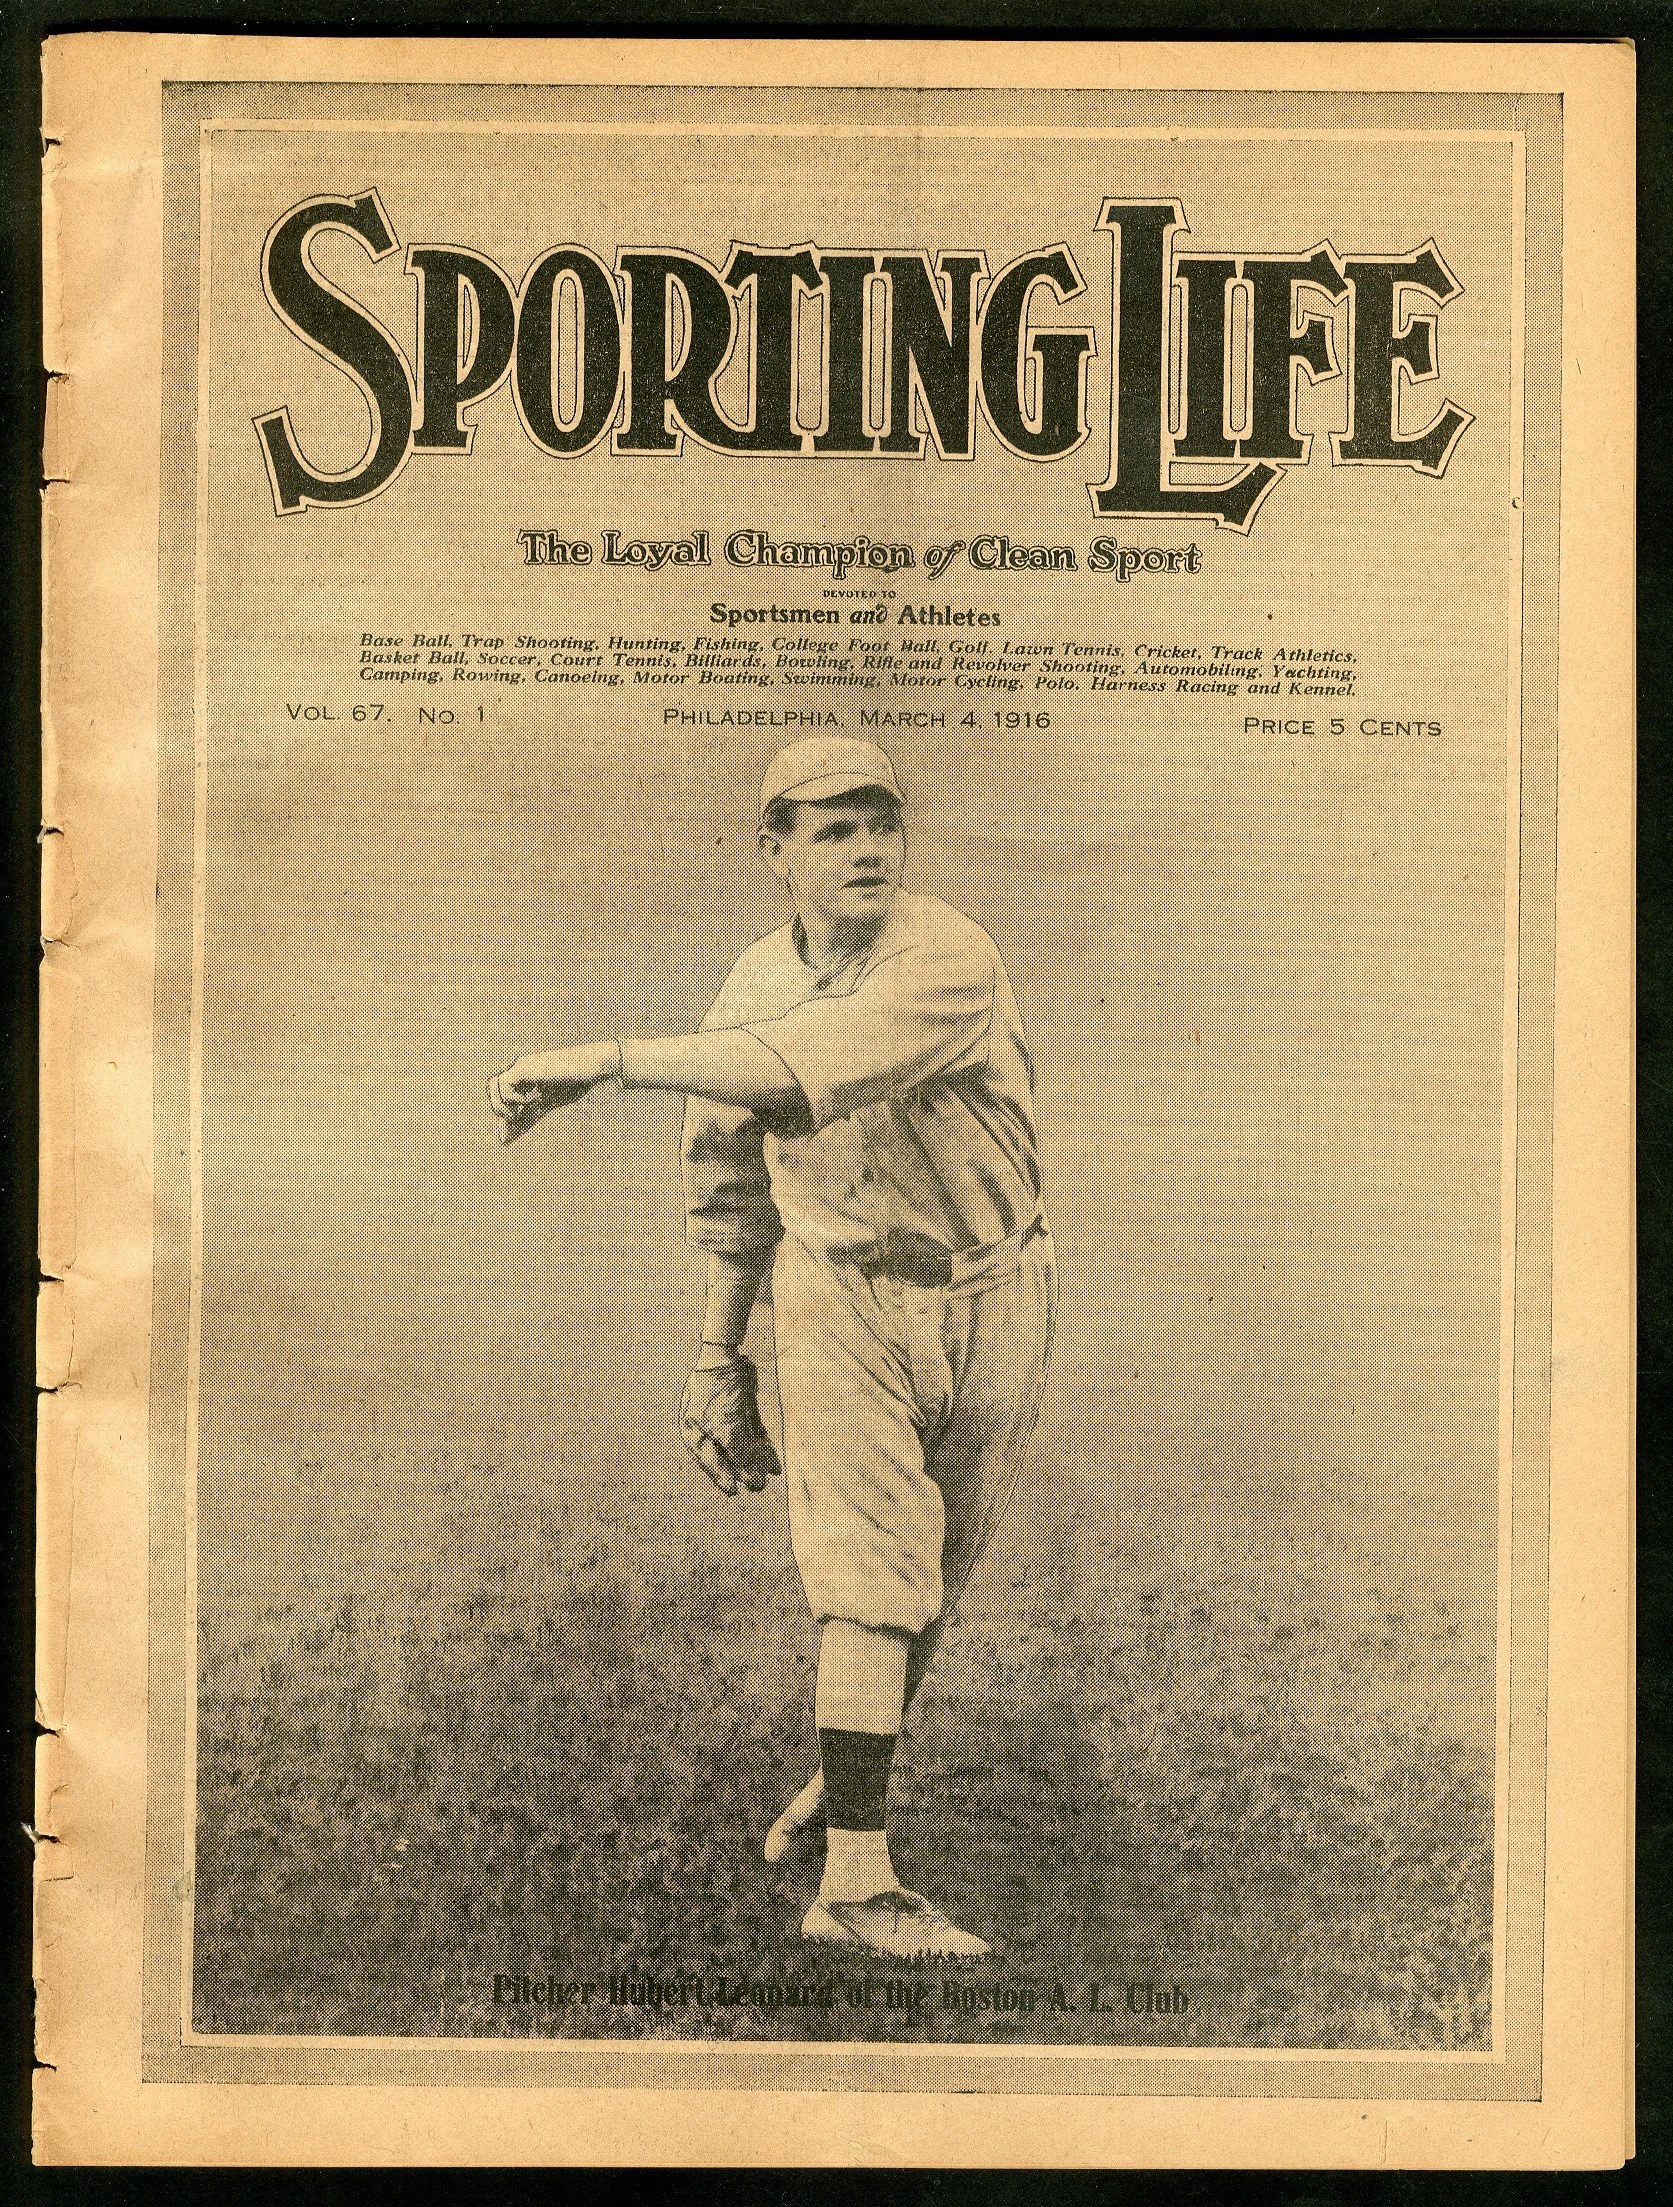 Babe Ruth - 1916 Sporting Life Magazine "Isn't that Babe Ruth?" Cover